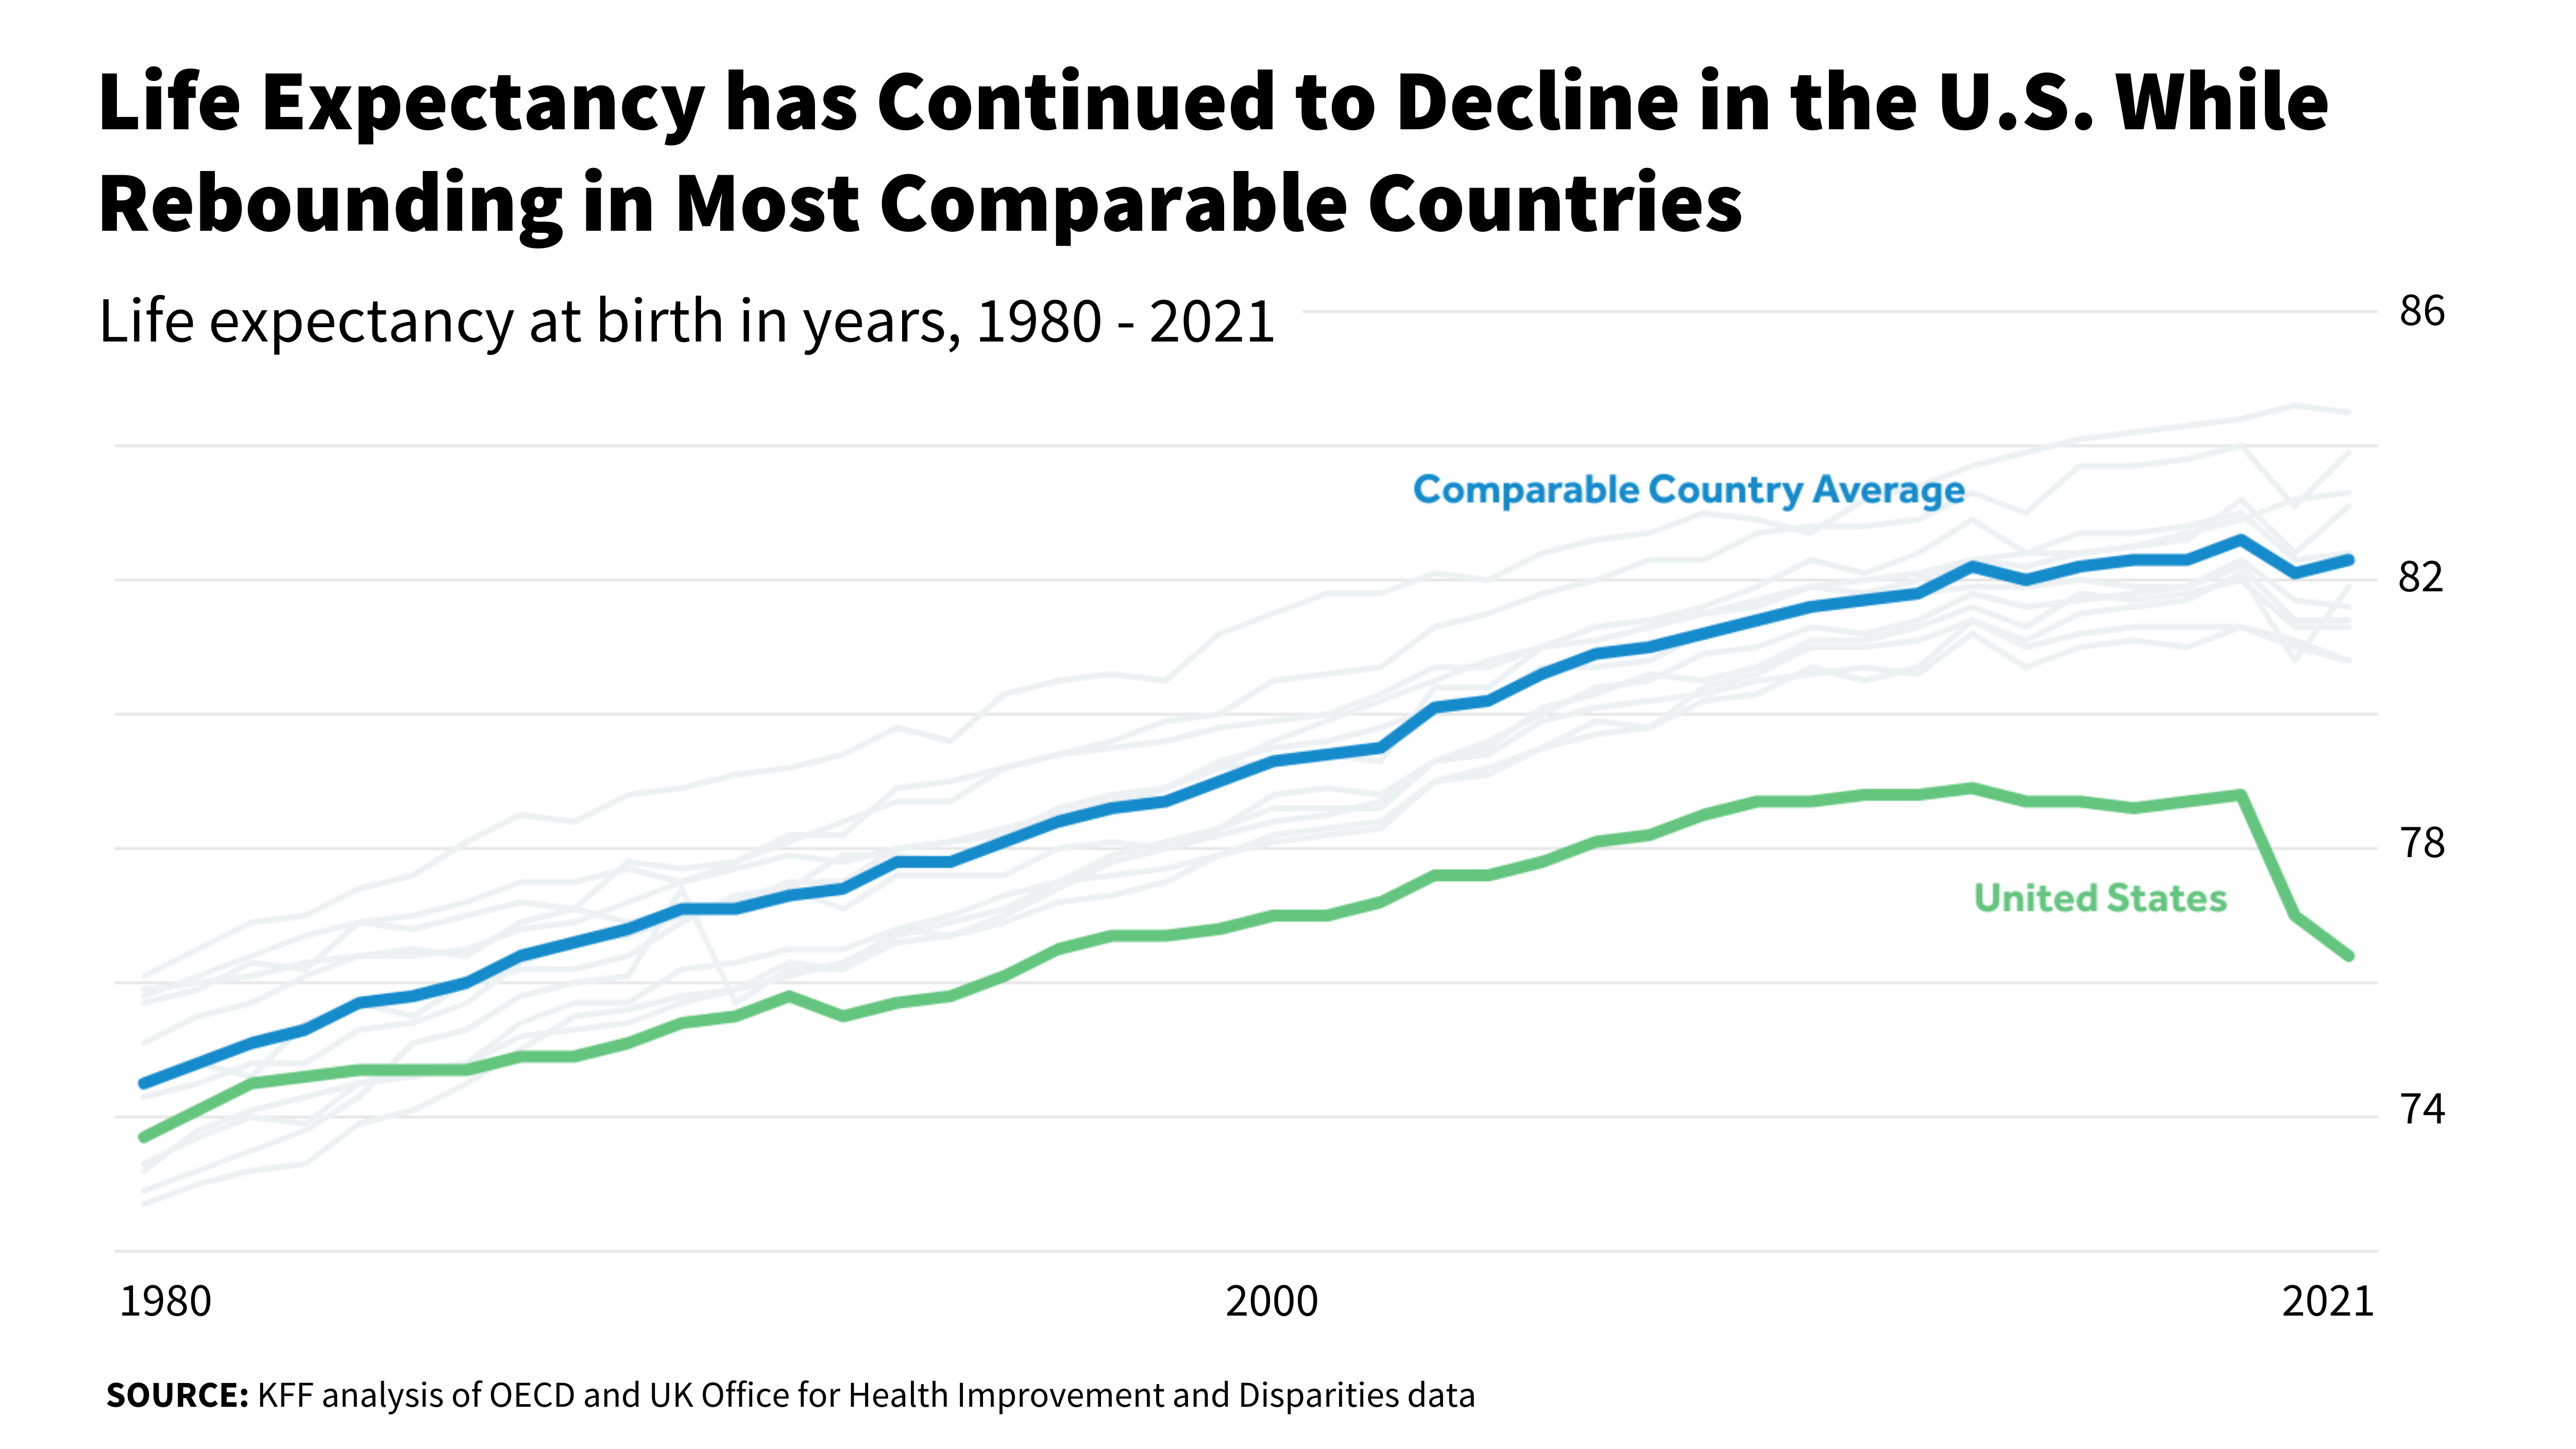 How Does U.S. Life Expectancy Compare to Other Countries